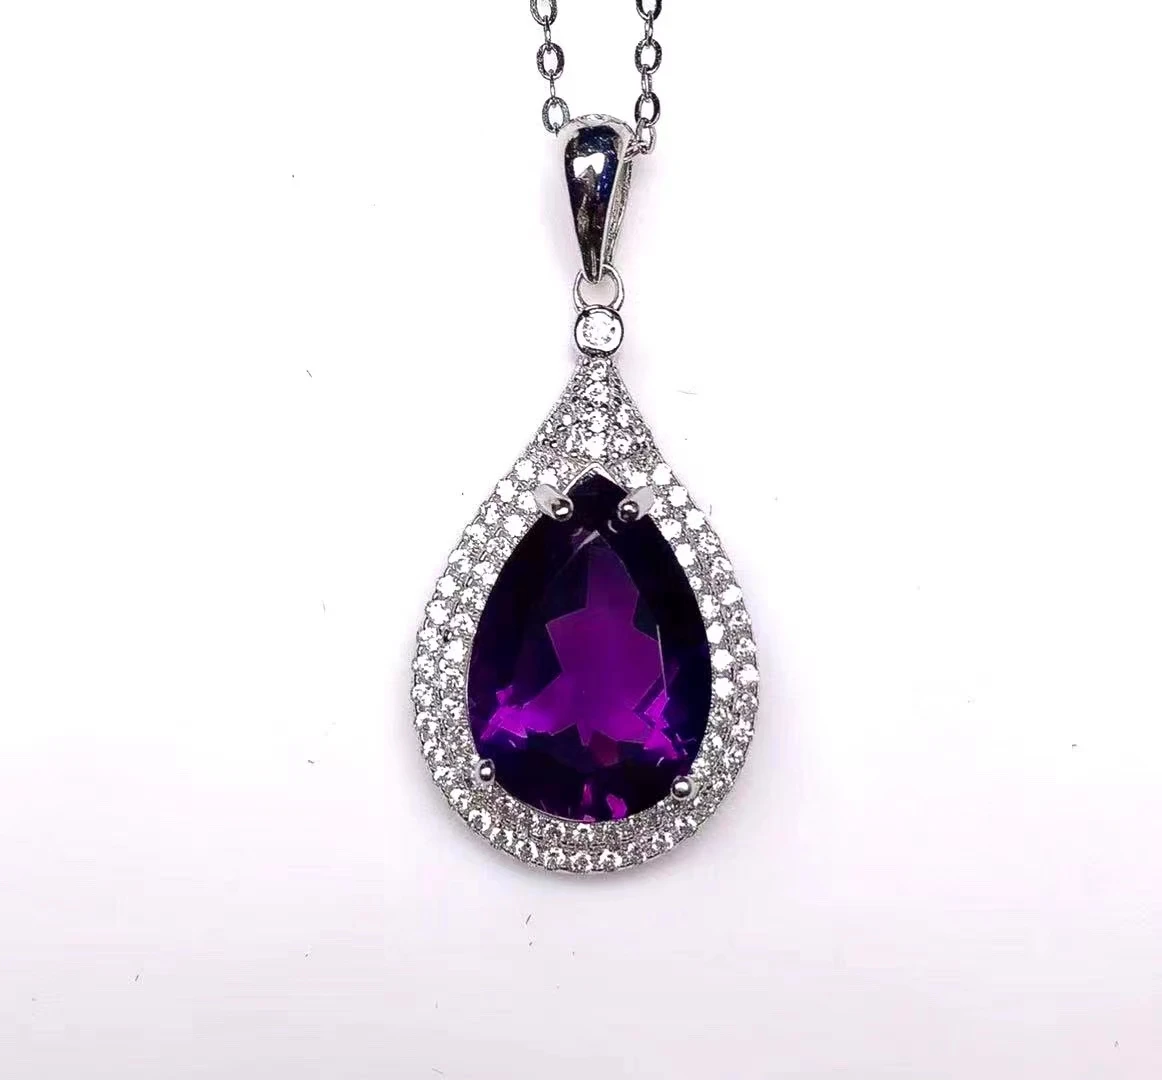 classic-silver-water-drop-pendant-10-14mm-natural-amethyst-pendant-for-party-solid-925-silver-amethyst-jewelry-gift-for-wife